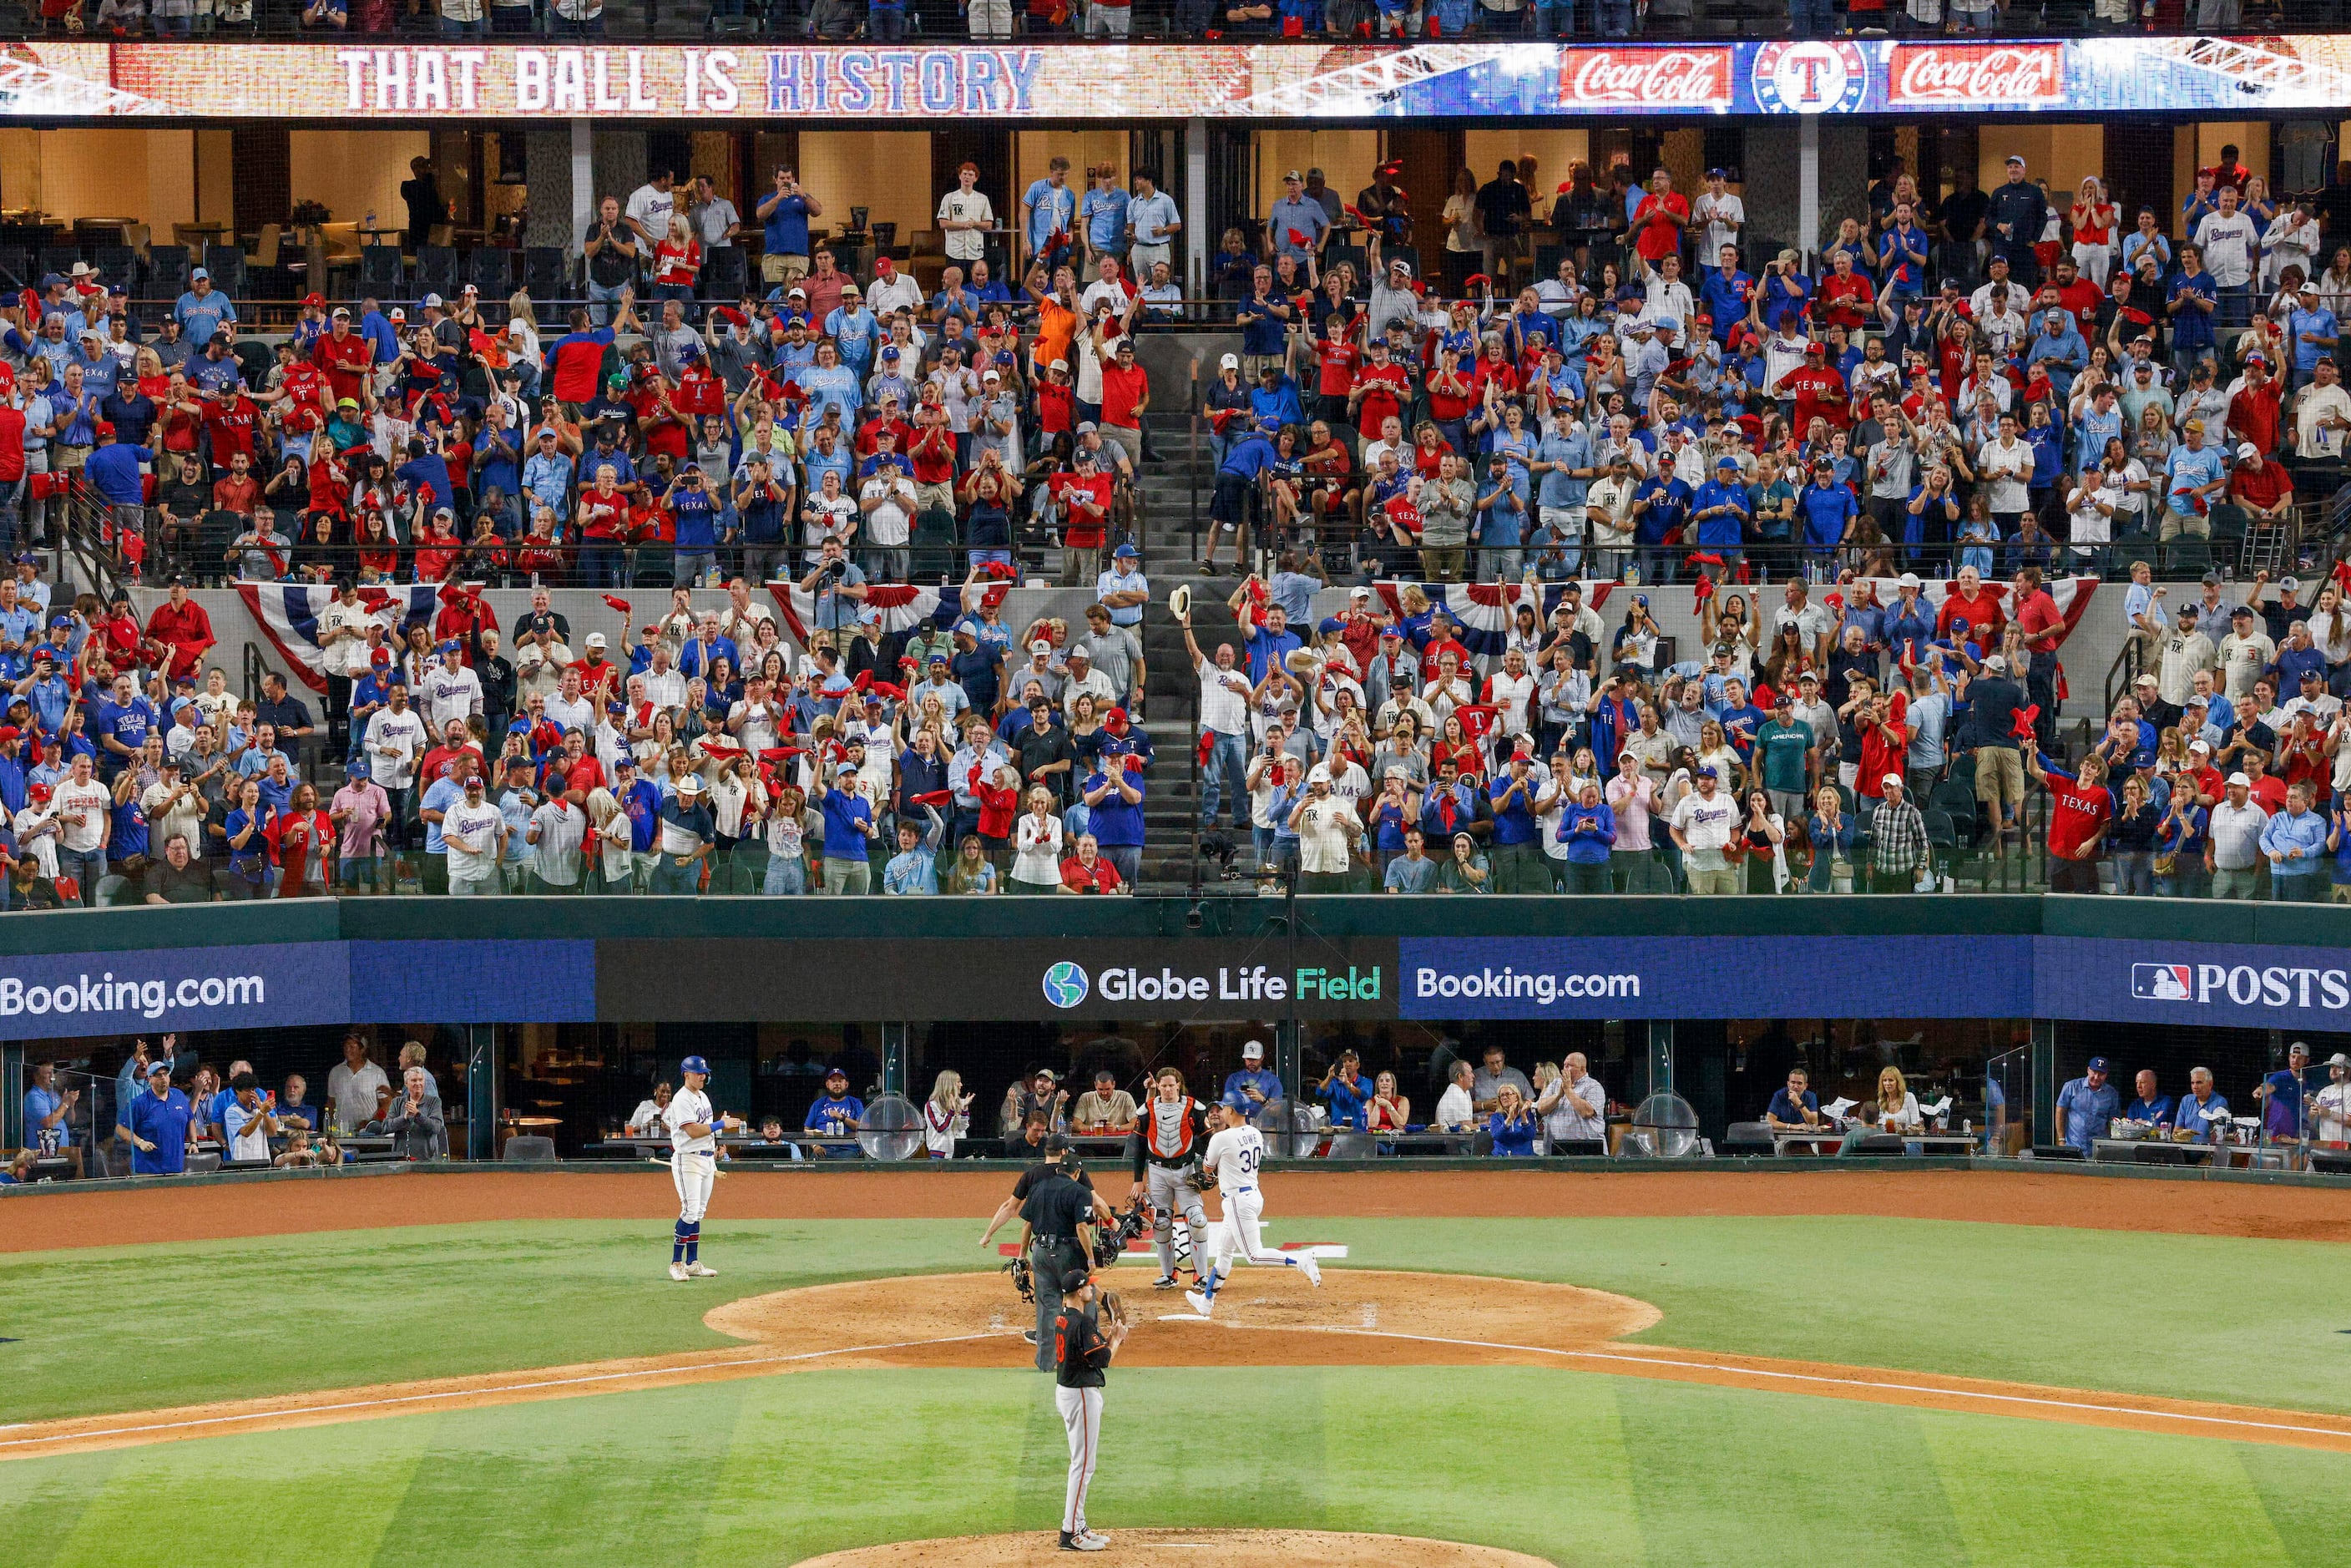 The suite life at Rangers games: Inside the one-of-a-kind